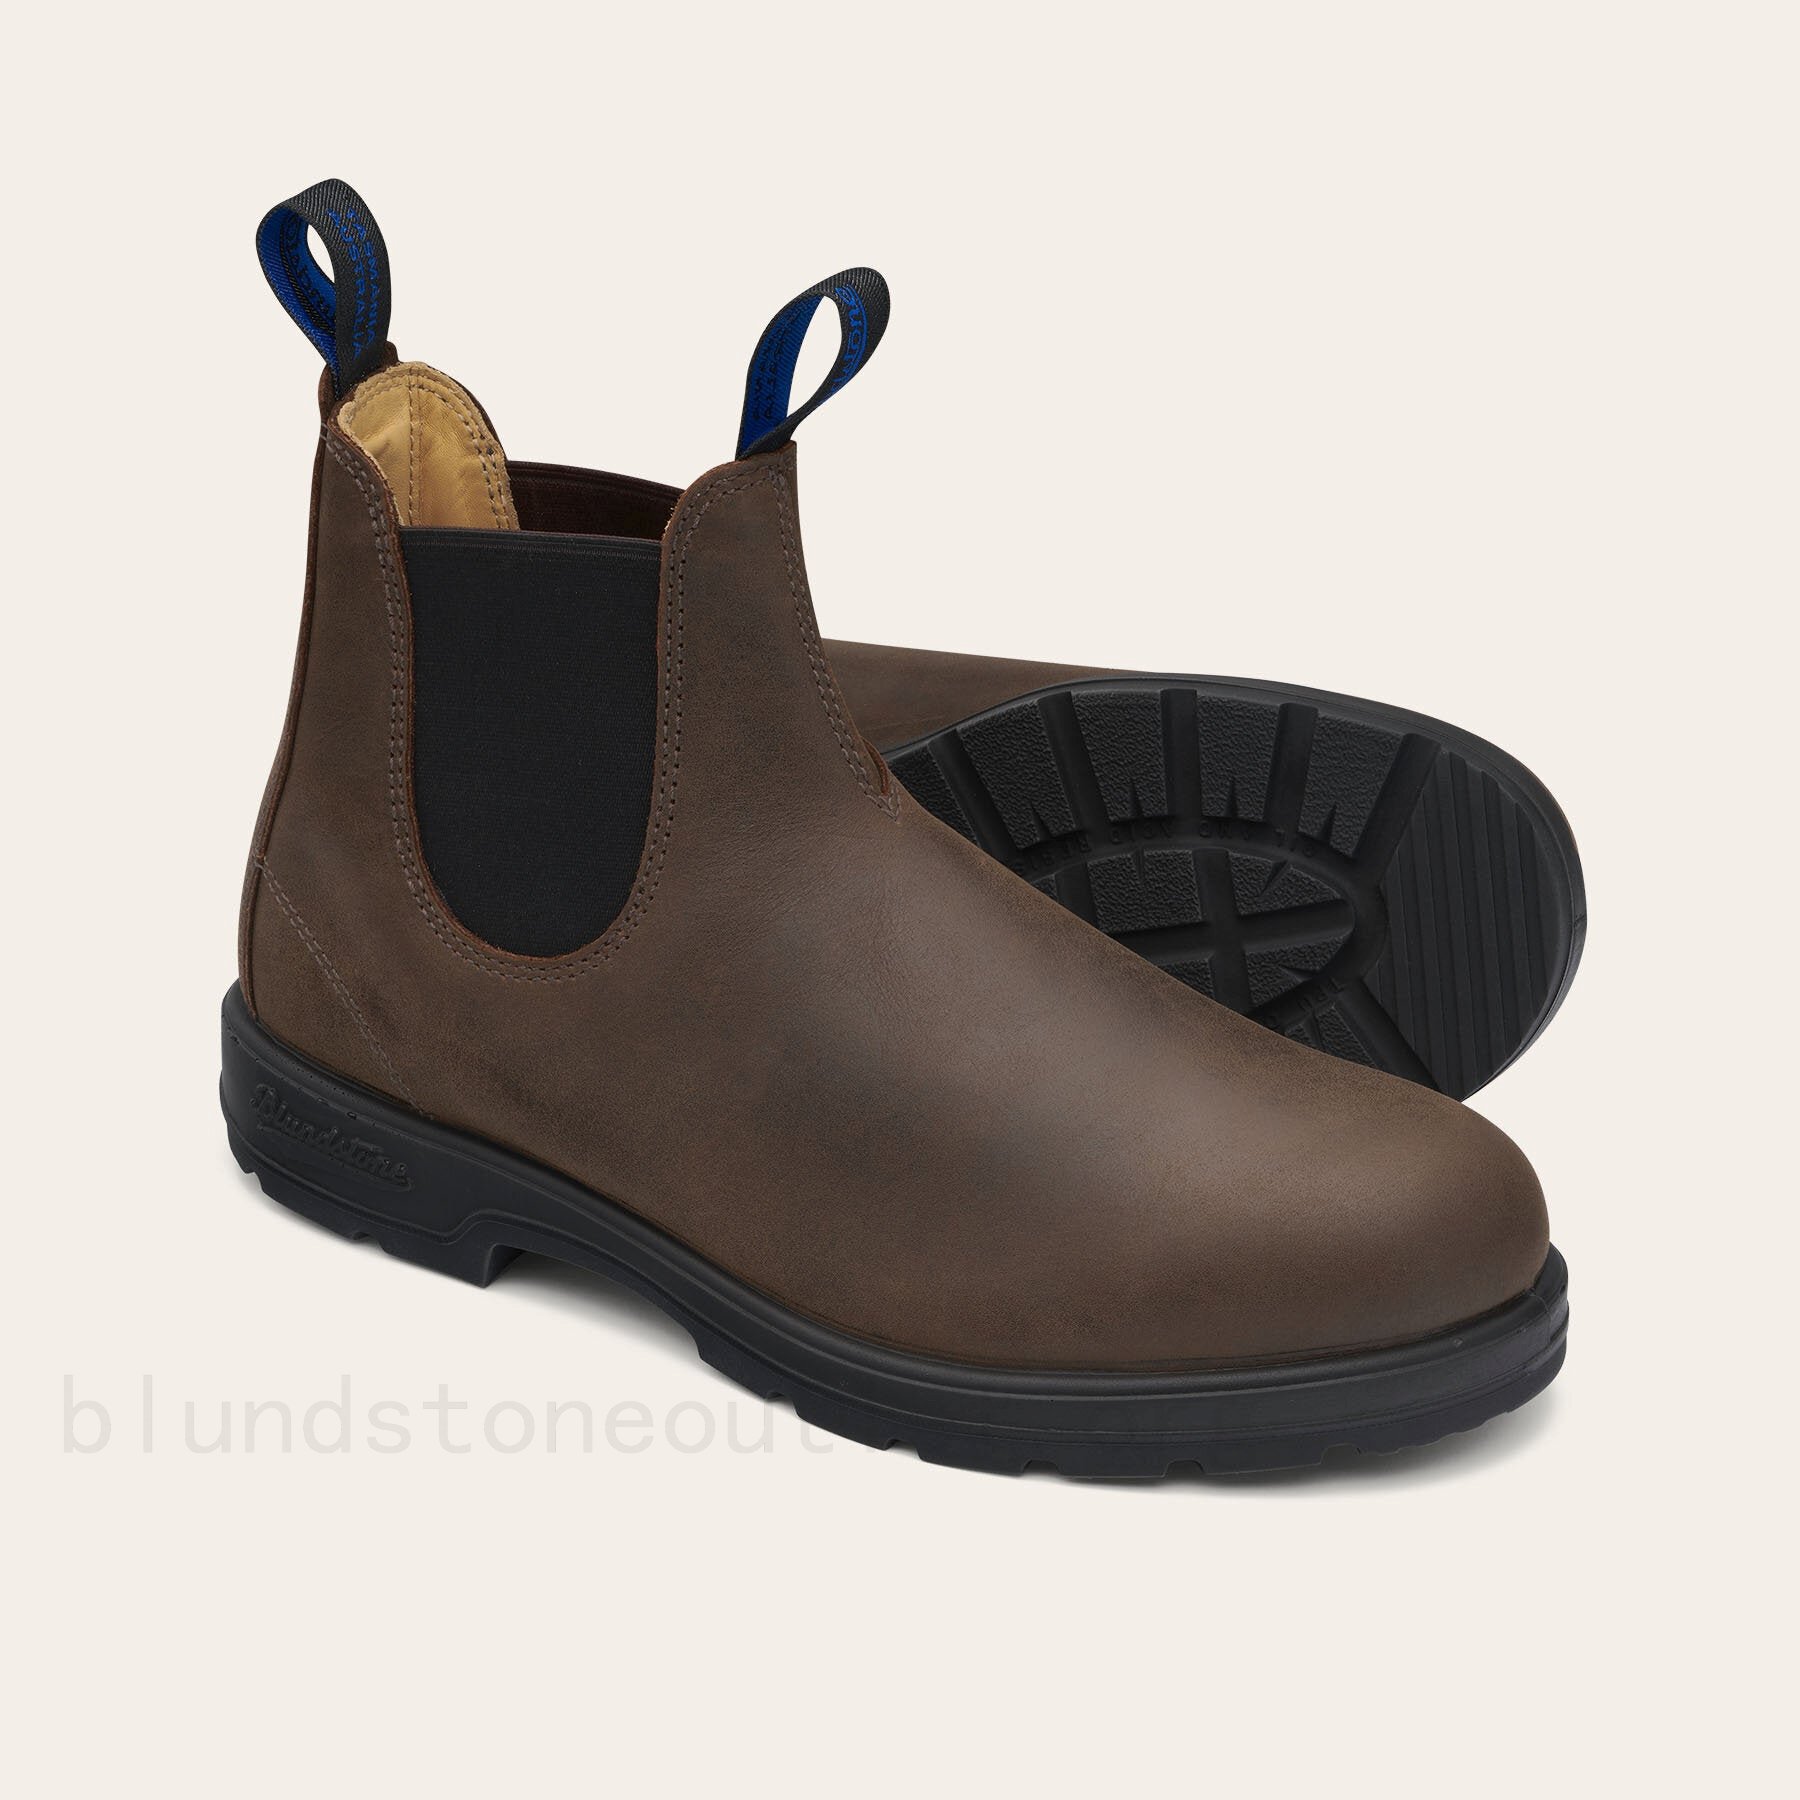 Outlet Shop Online 1477 THERMAL ANTIQUE BROWN blundstone sconto